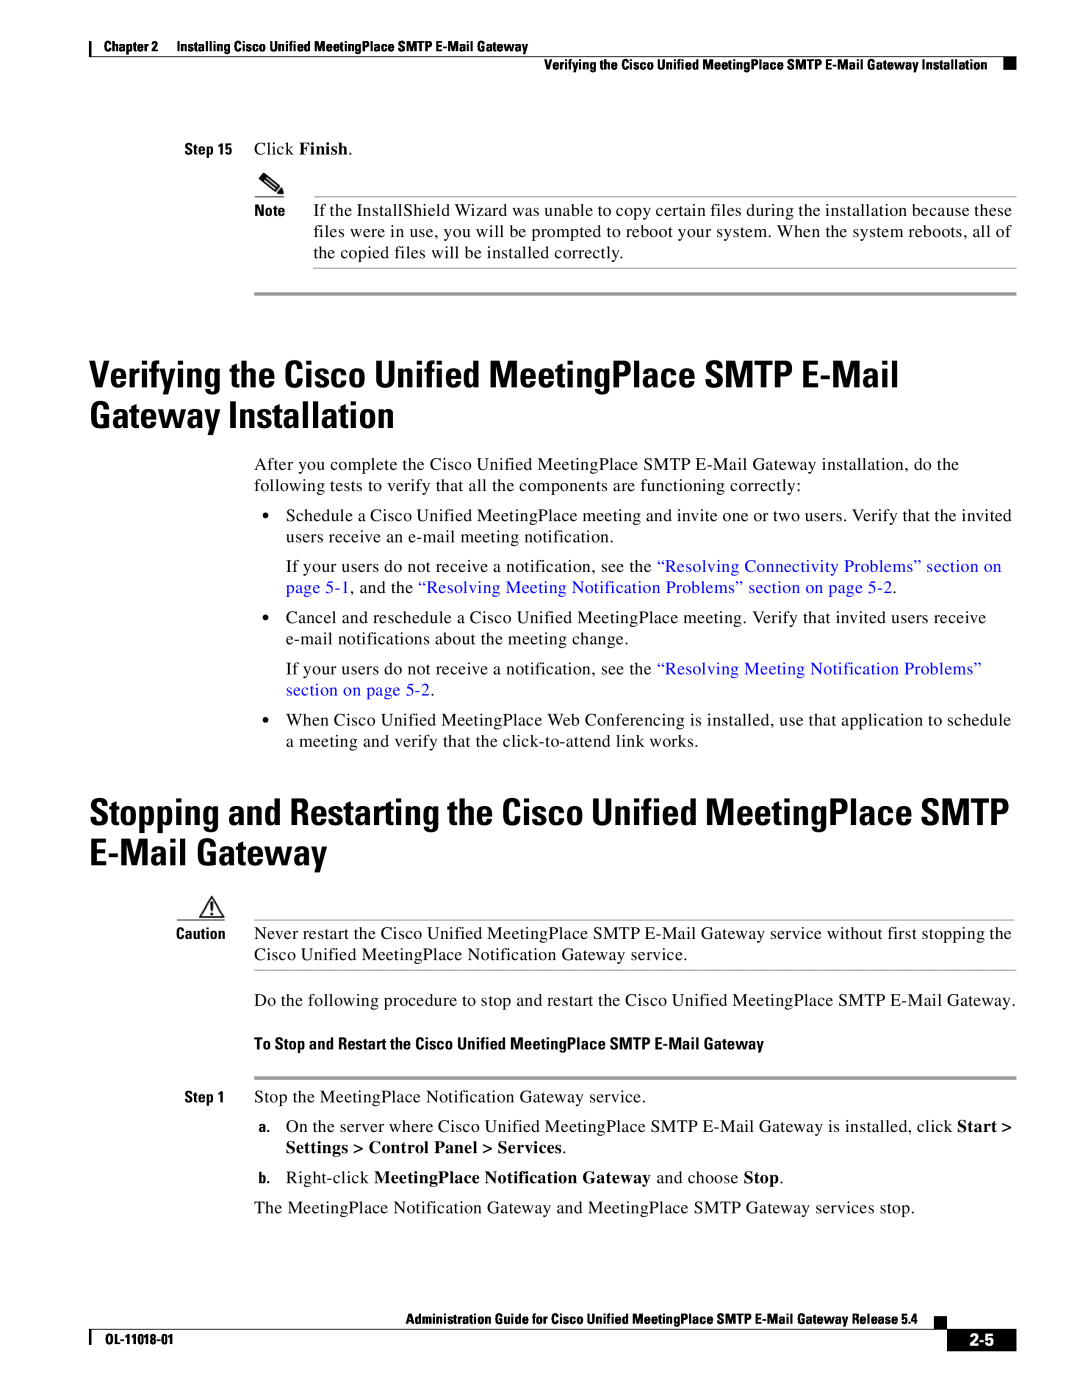 Cisco Systems SMTP manual b. Right-click MeetingPlace Notification Gateway and choose Stop 